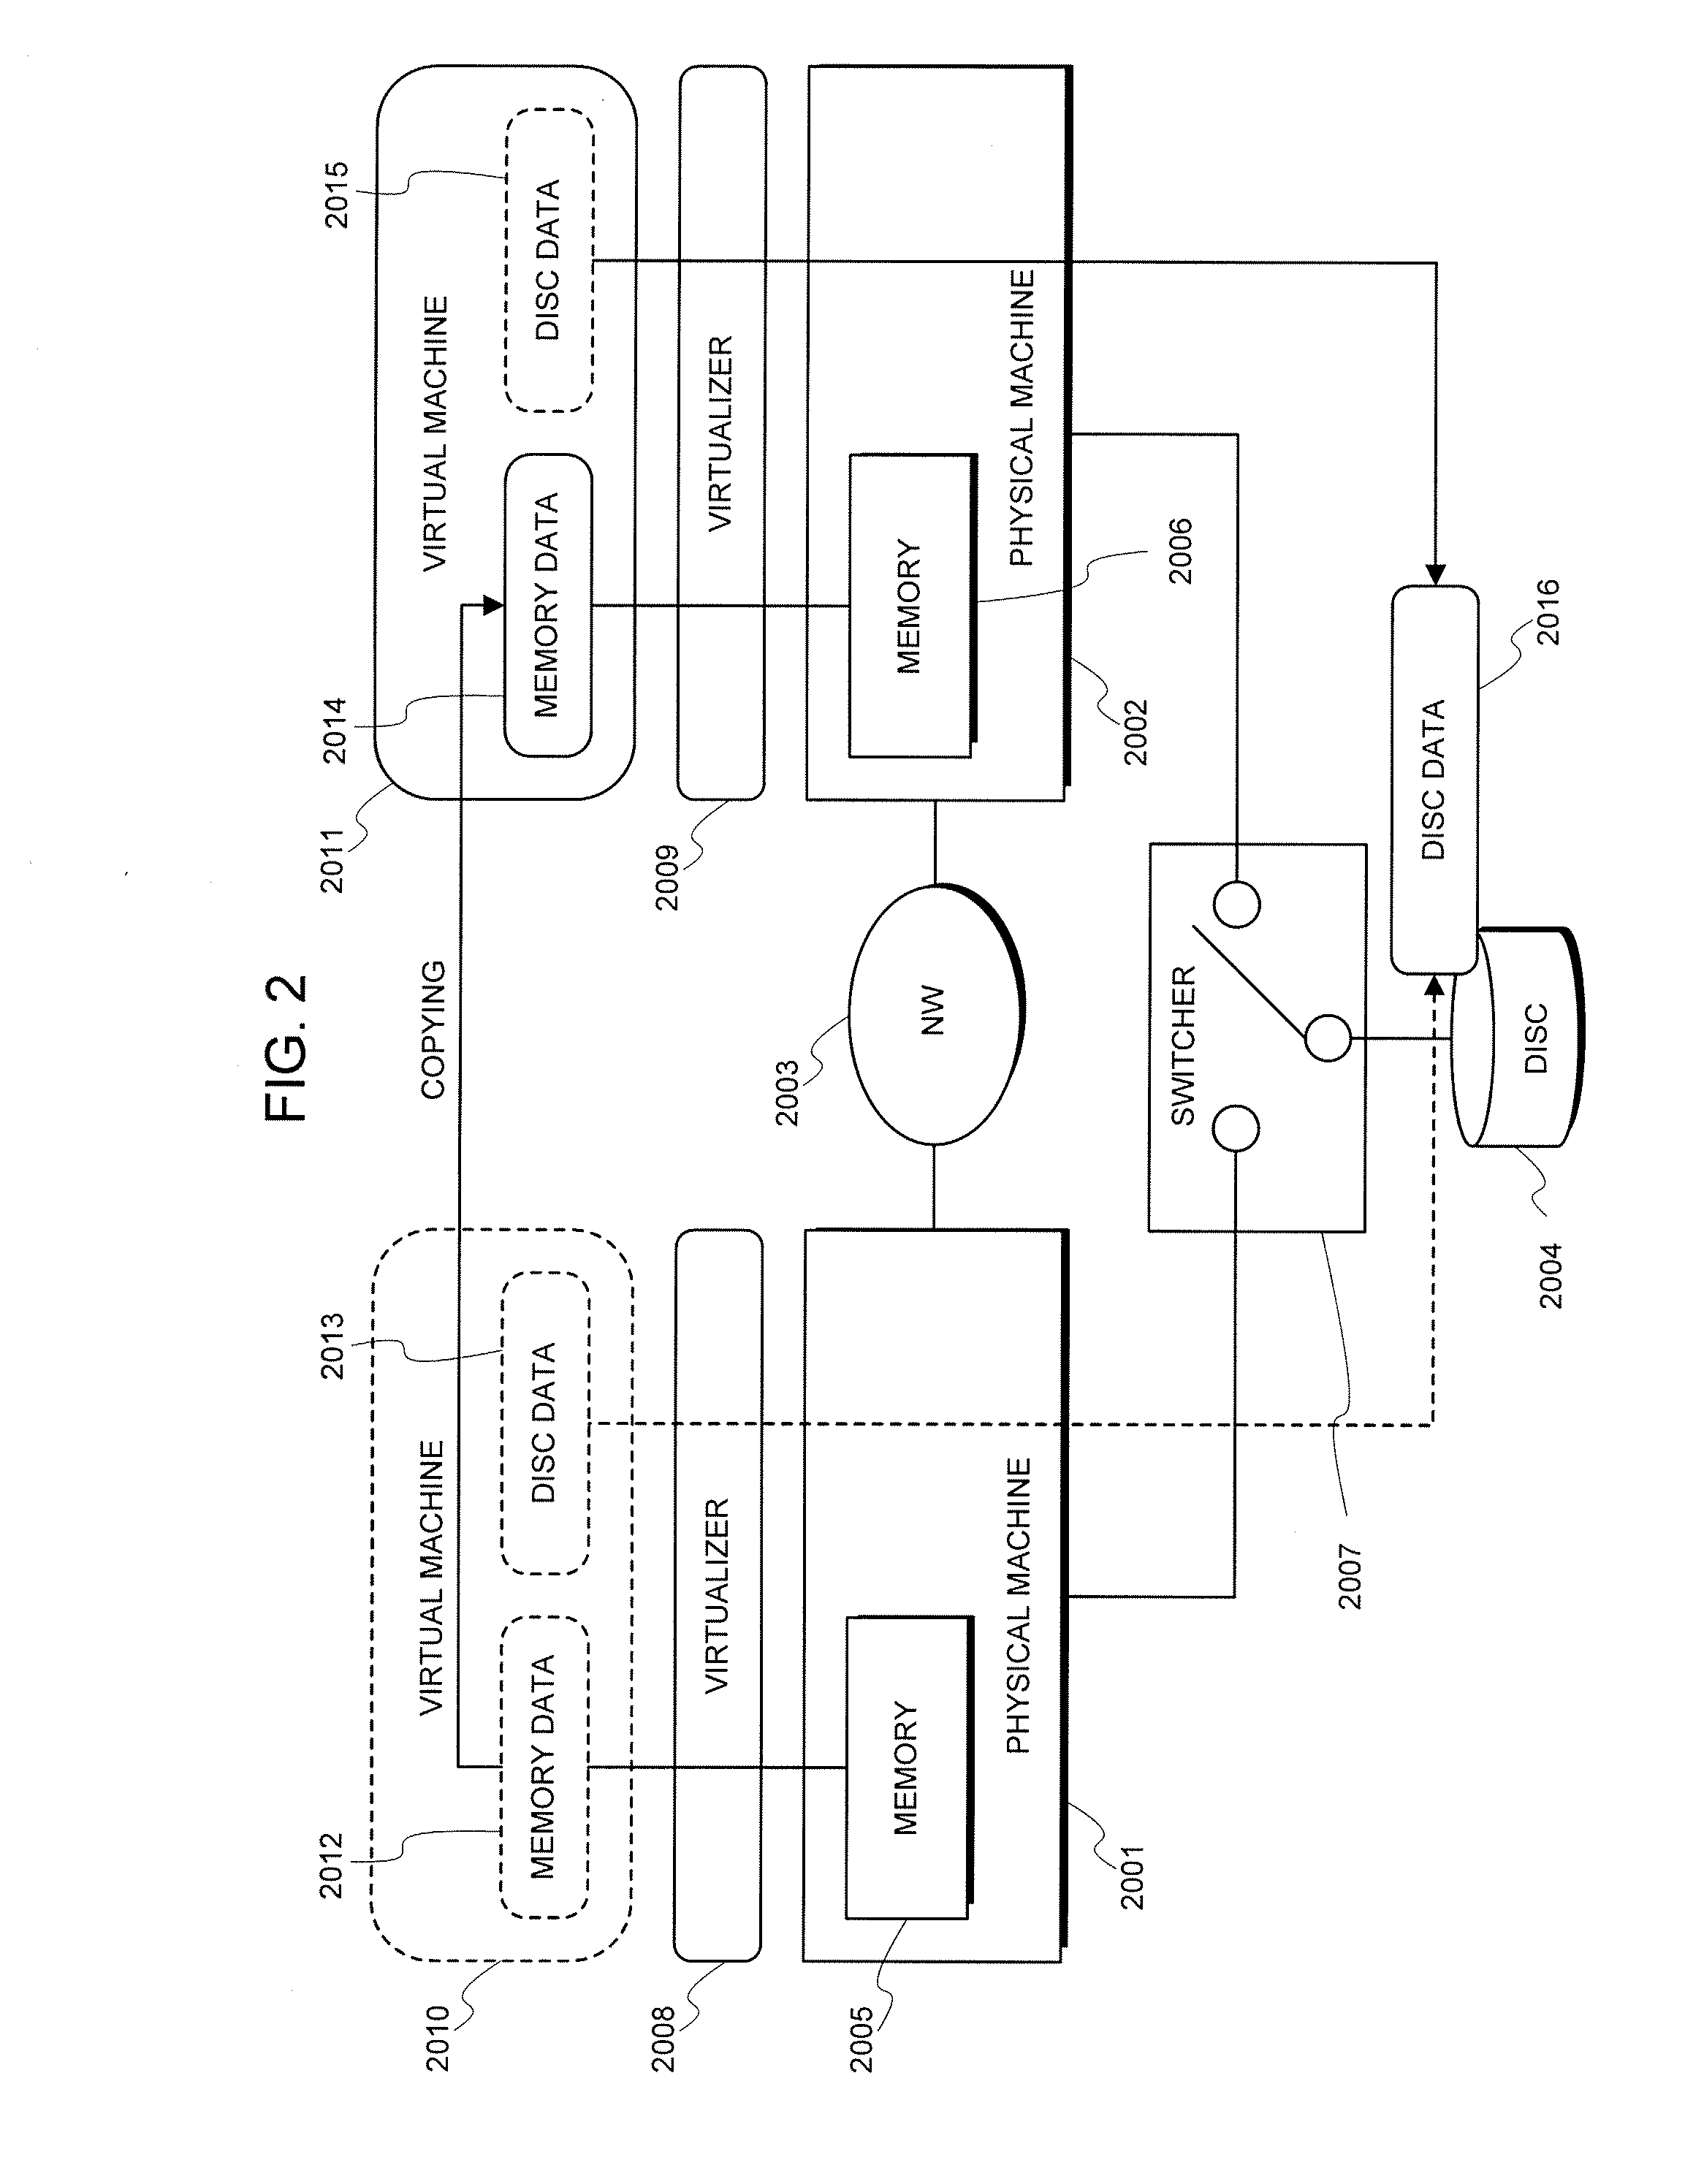 Virtual machine configuration system and method thereof